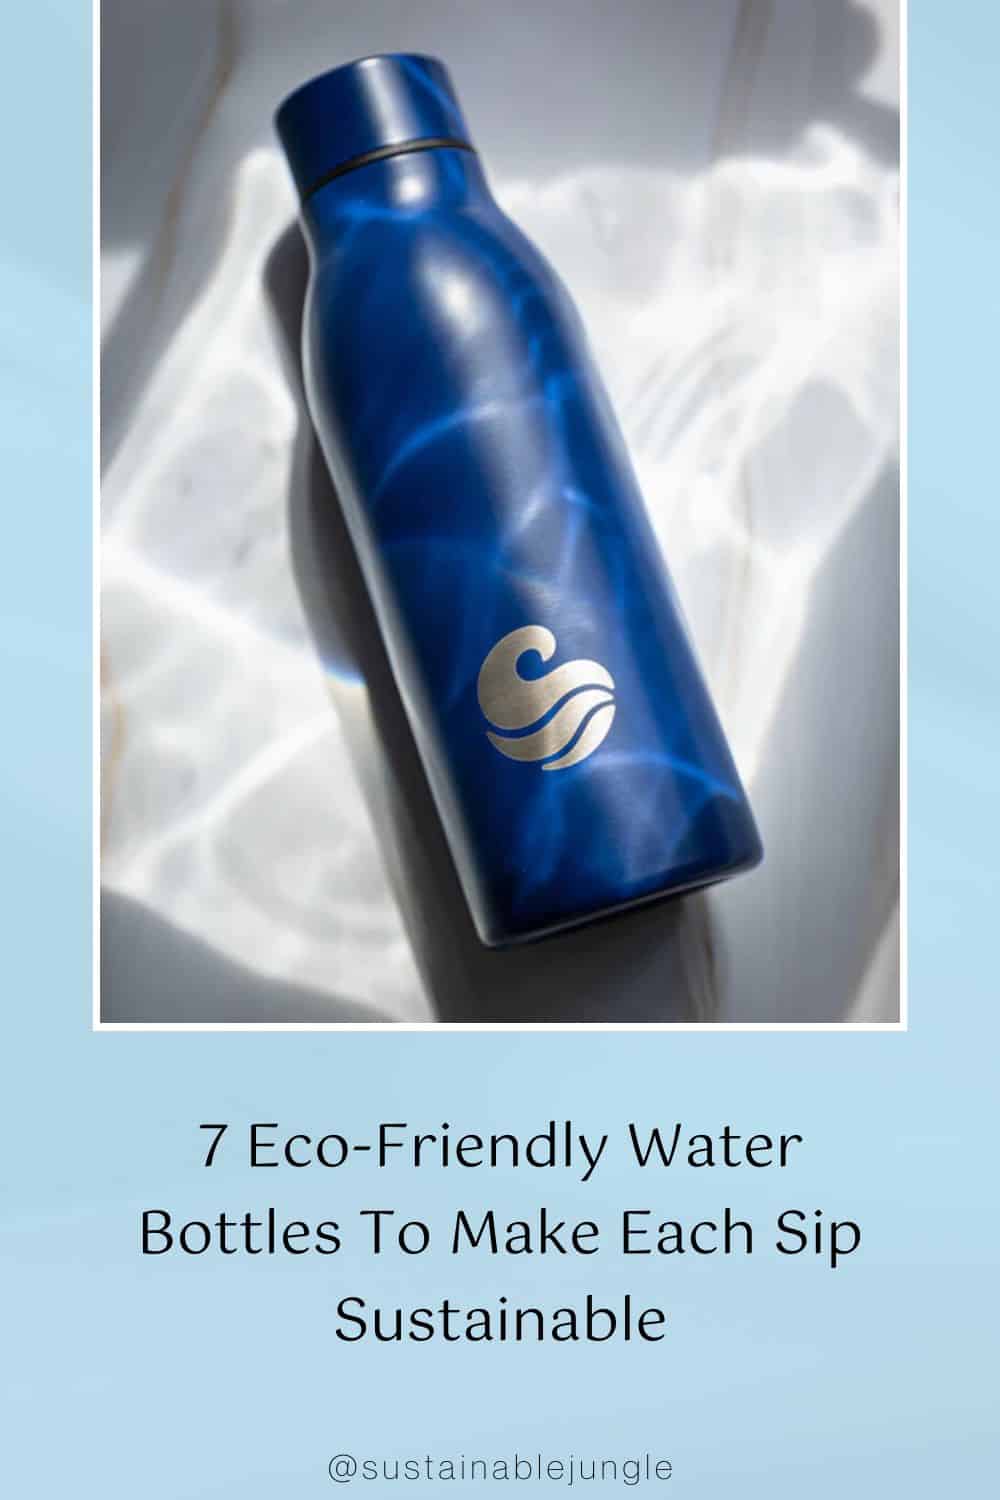 7 Eco-Friendly Water Bottles To Make Each Sip Sustainable Image by Wavecase #ecofriendlywaterbottles #ecofriendlystainlesssteelwaterbottles #ecofriendlyreusablewaterbottles #sustainablewaterbottles #sustainableglasswaterbottles #ecofriendlybottles #sustainablejungle